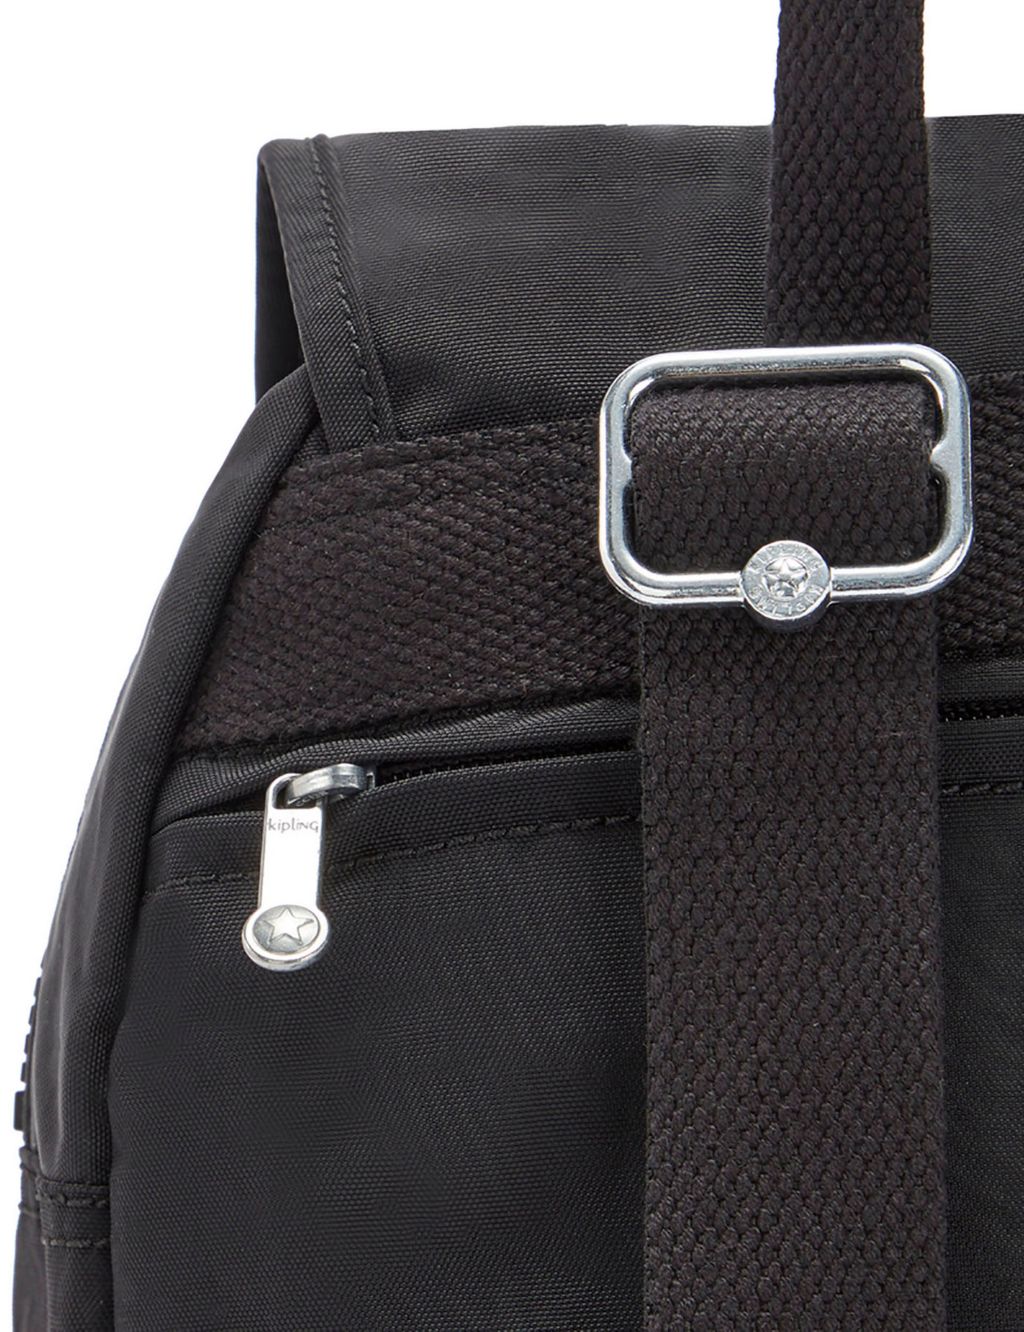 City Pack Water Resistant Backpack image 6